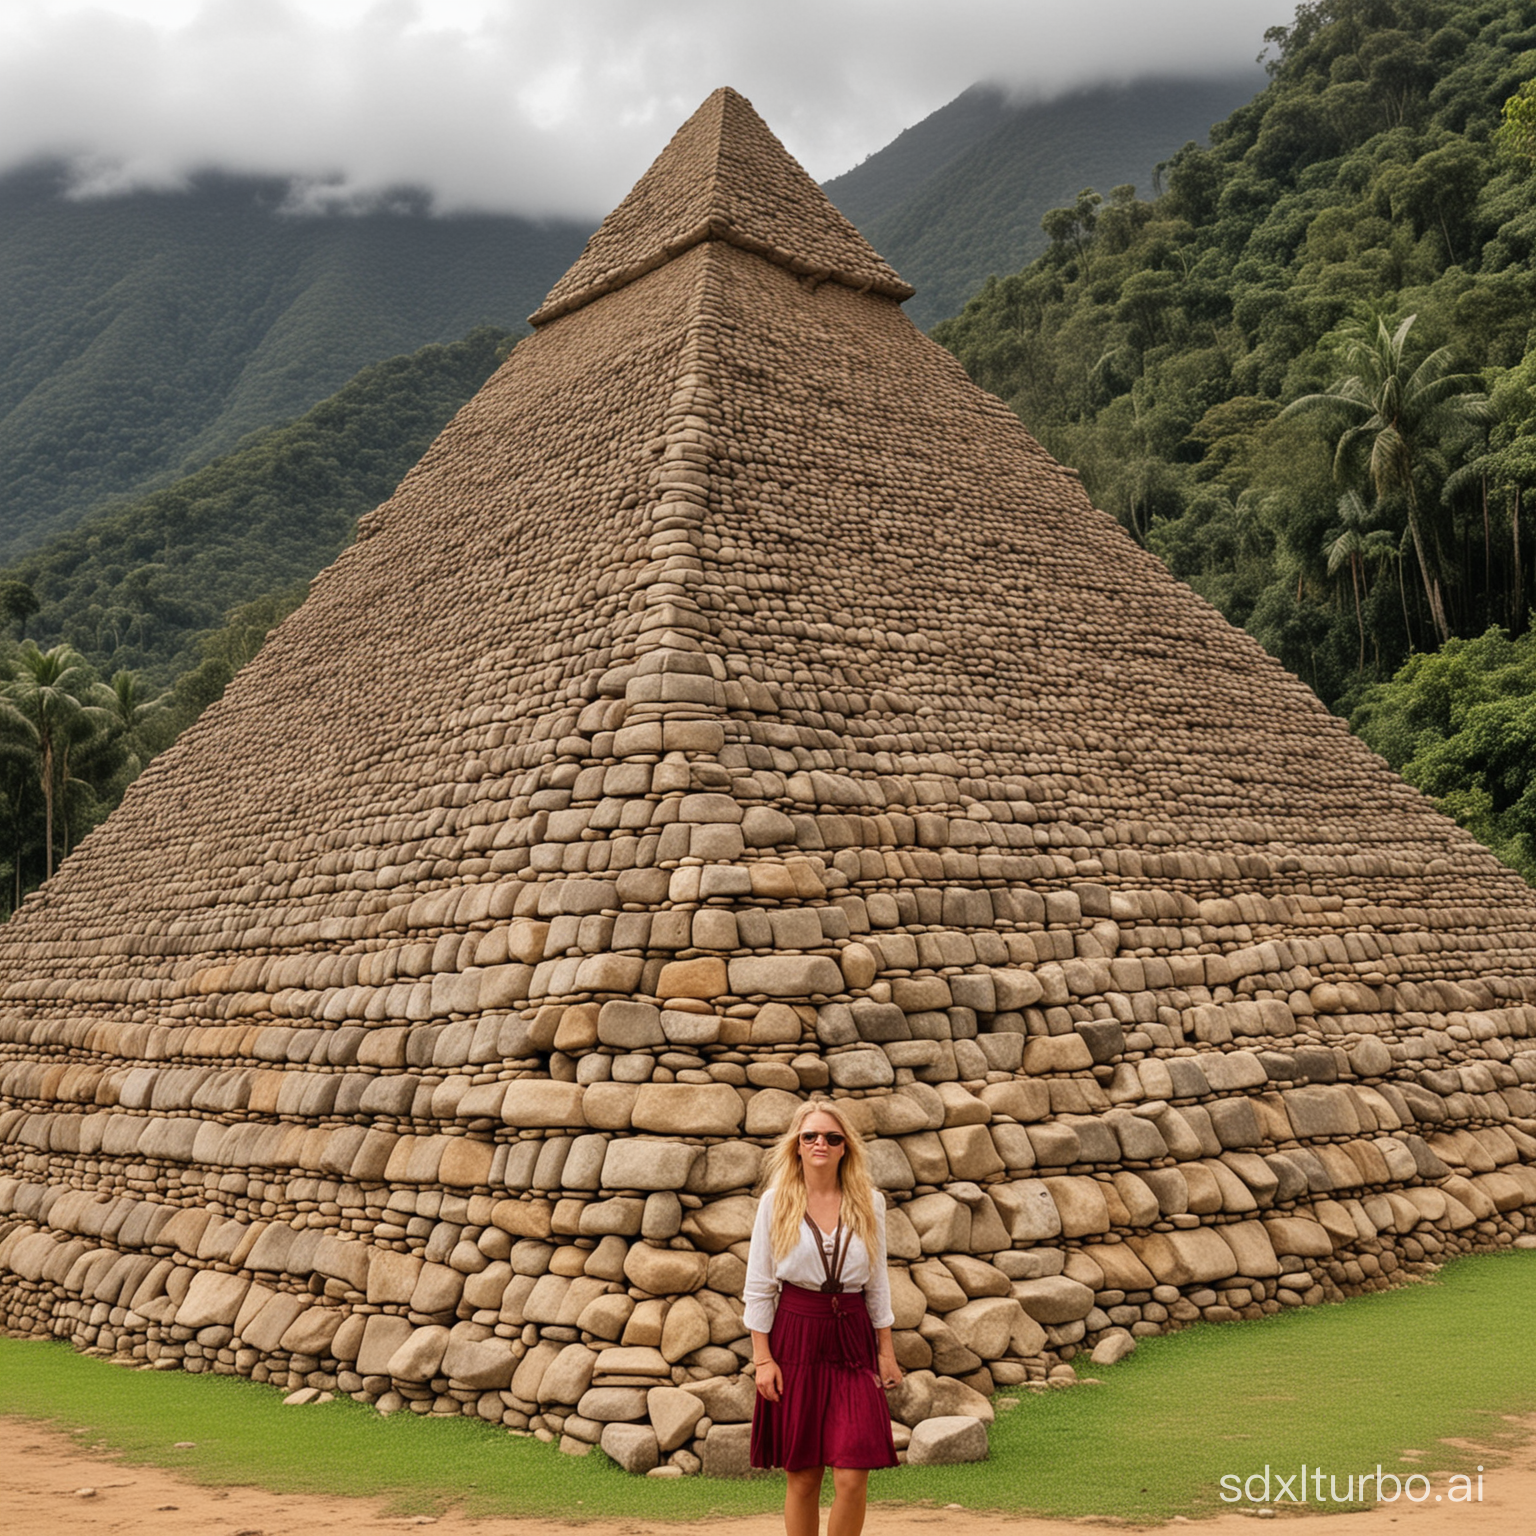 Photo of ancient Blonde Norwegian building pyramids in Colombia